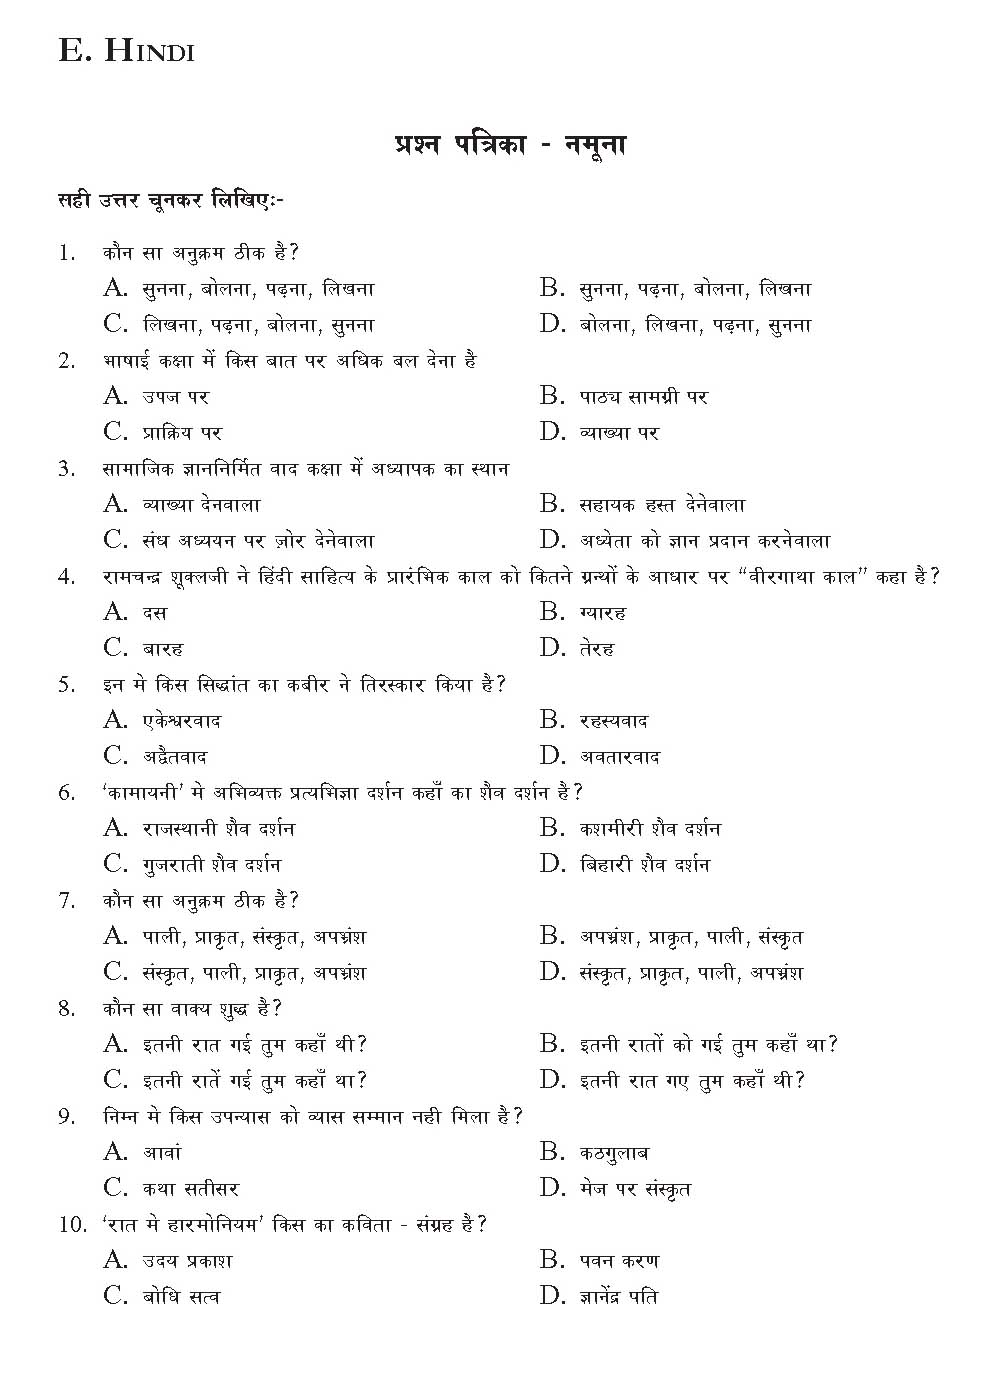 KTET Category III Paper III Kannada and Hindi Question Papers with Answers 2012 2